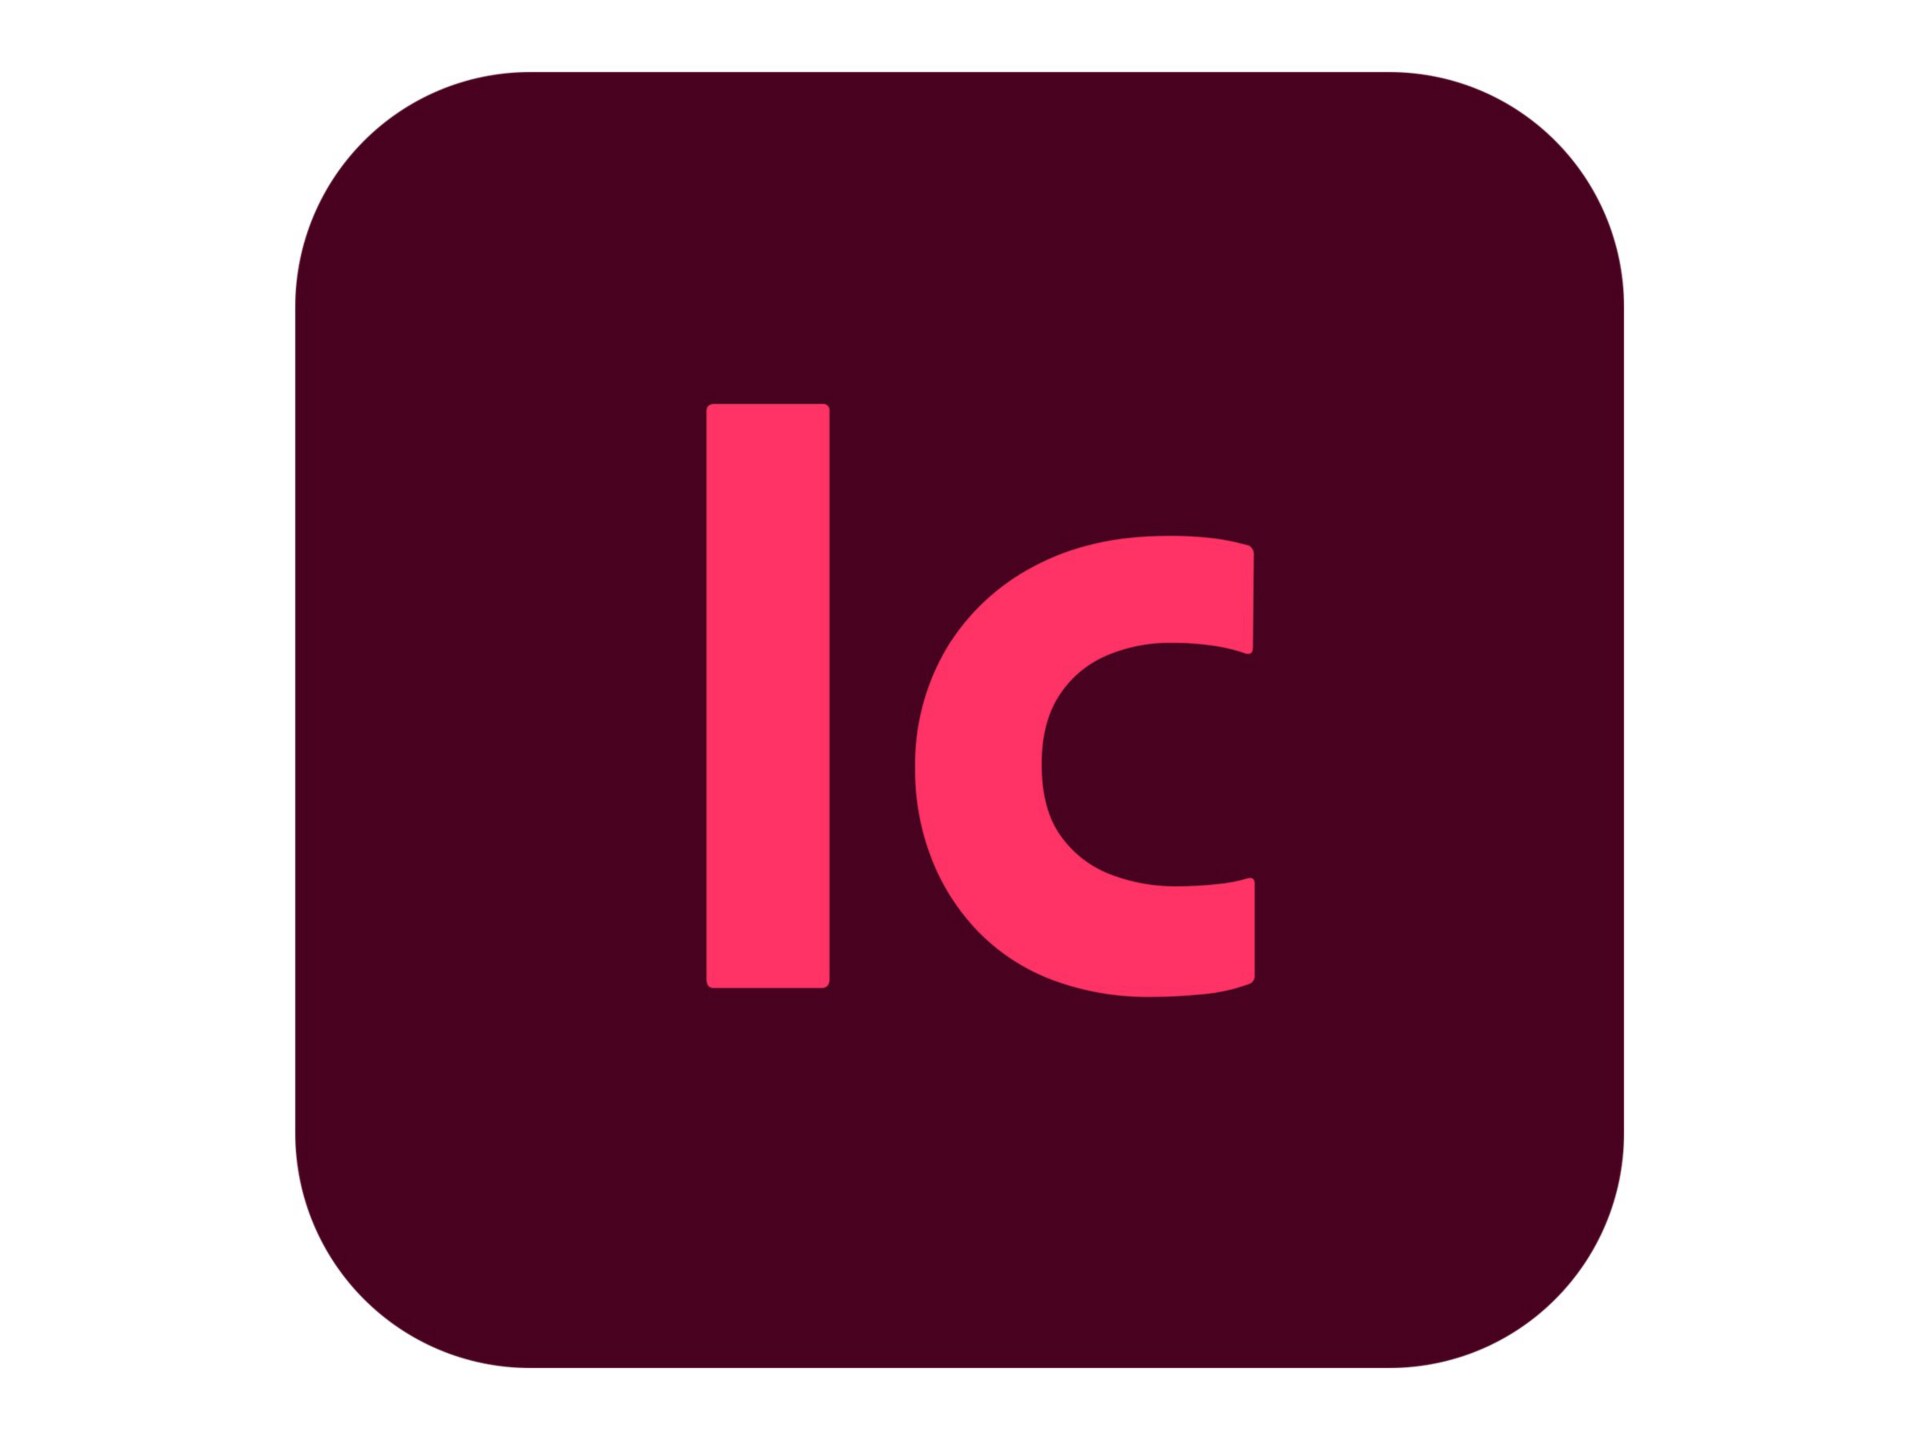 Adobe InCopy CC - Subscription New (2 years) - 1 user